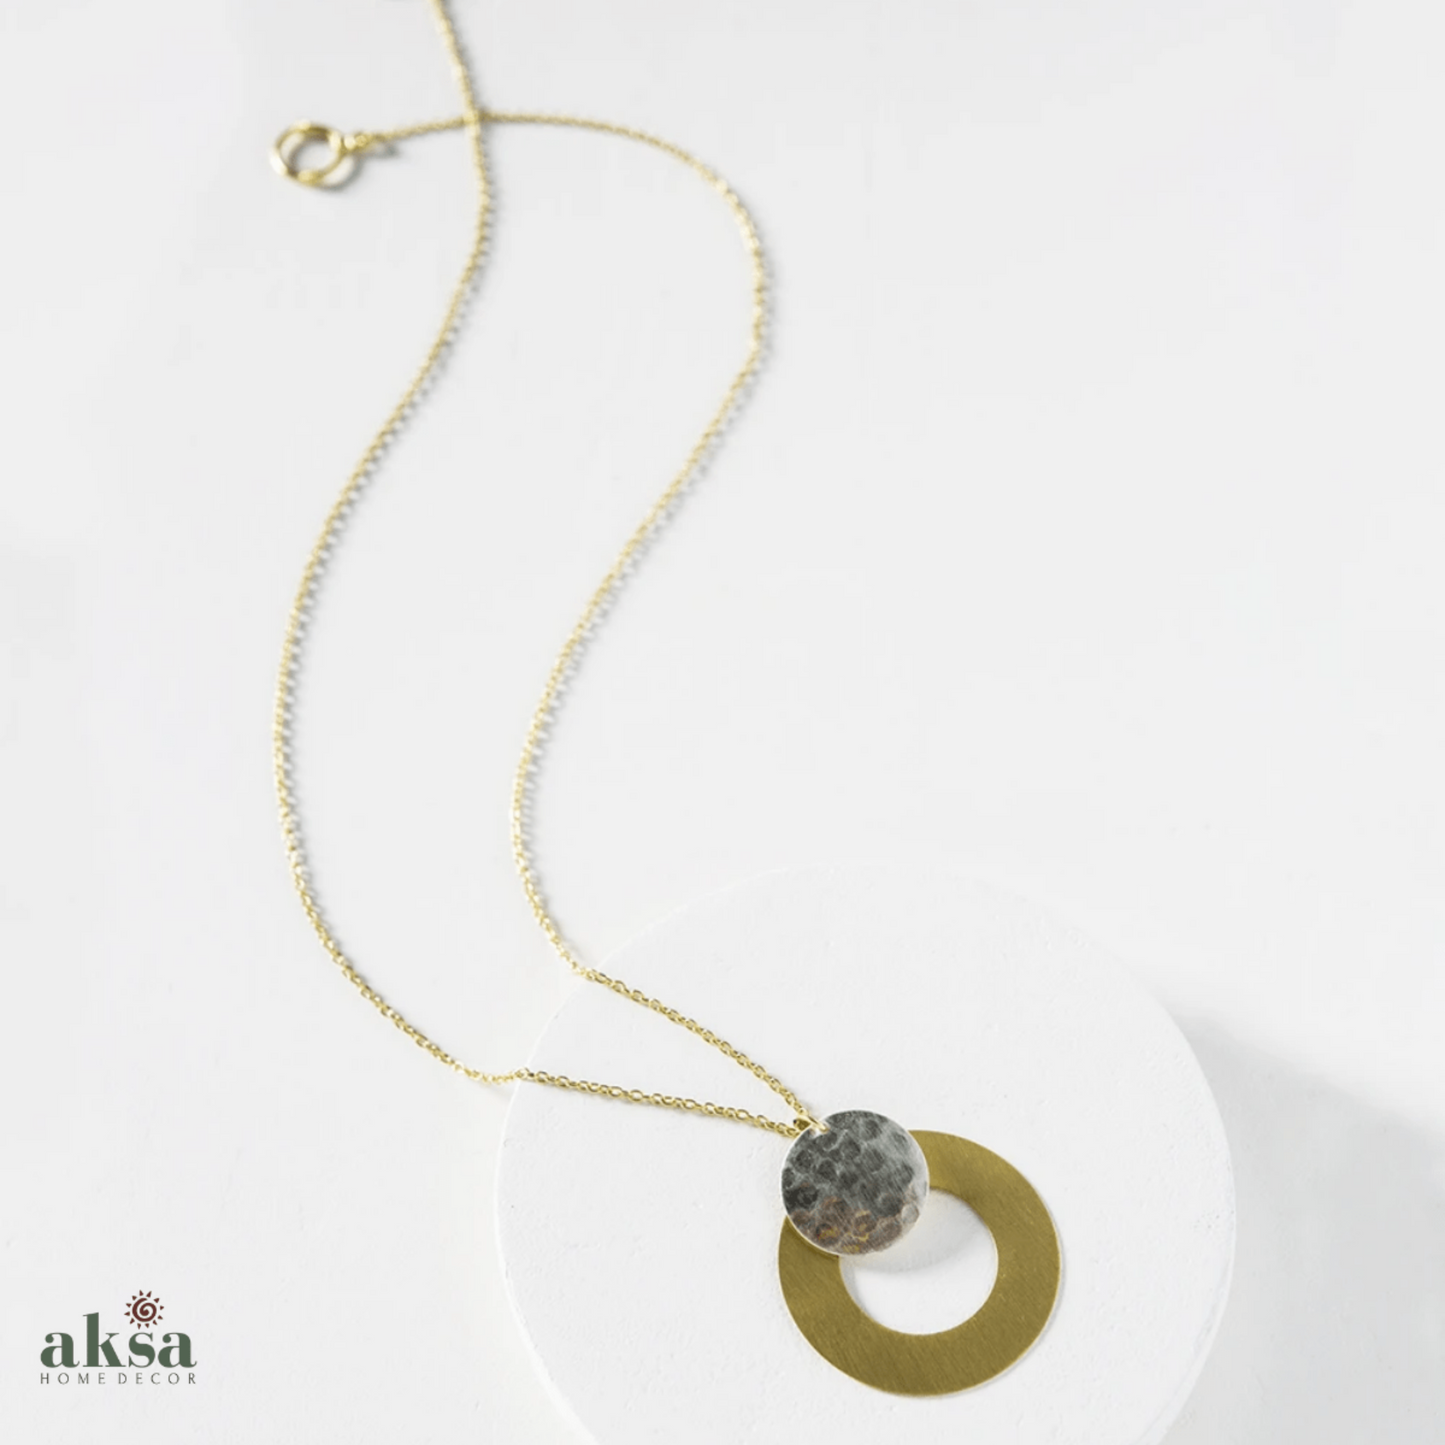 Silver and Gold Disc Chain Pendant Necklace - Handcrafted, Brass, Aarna - Aksa Home Decor 